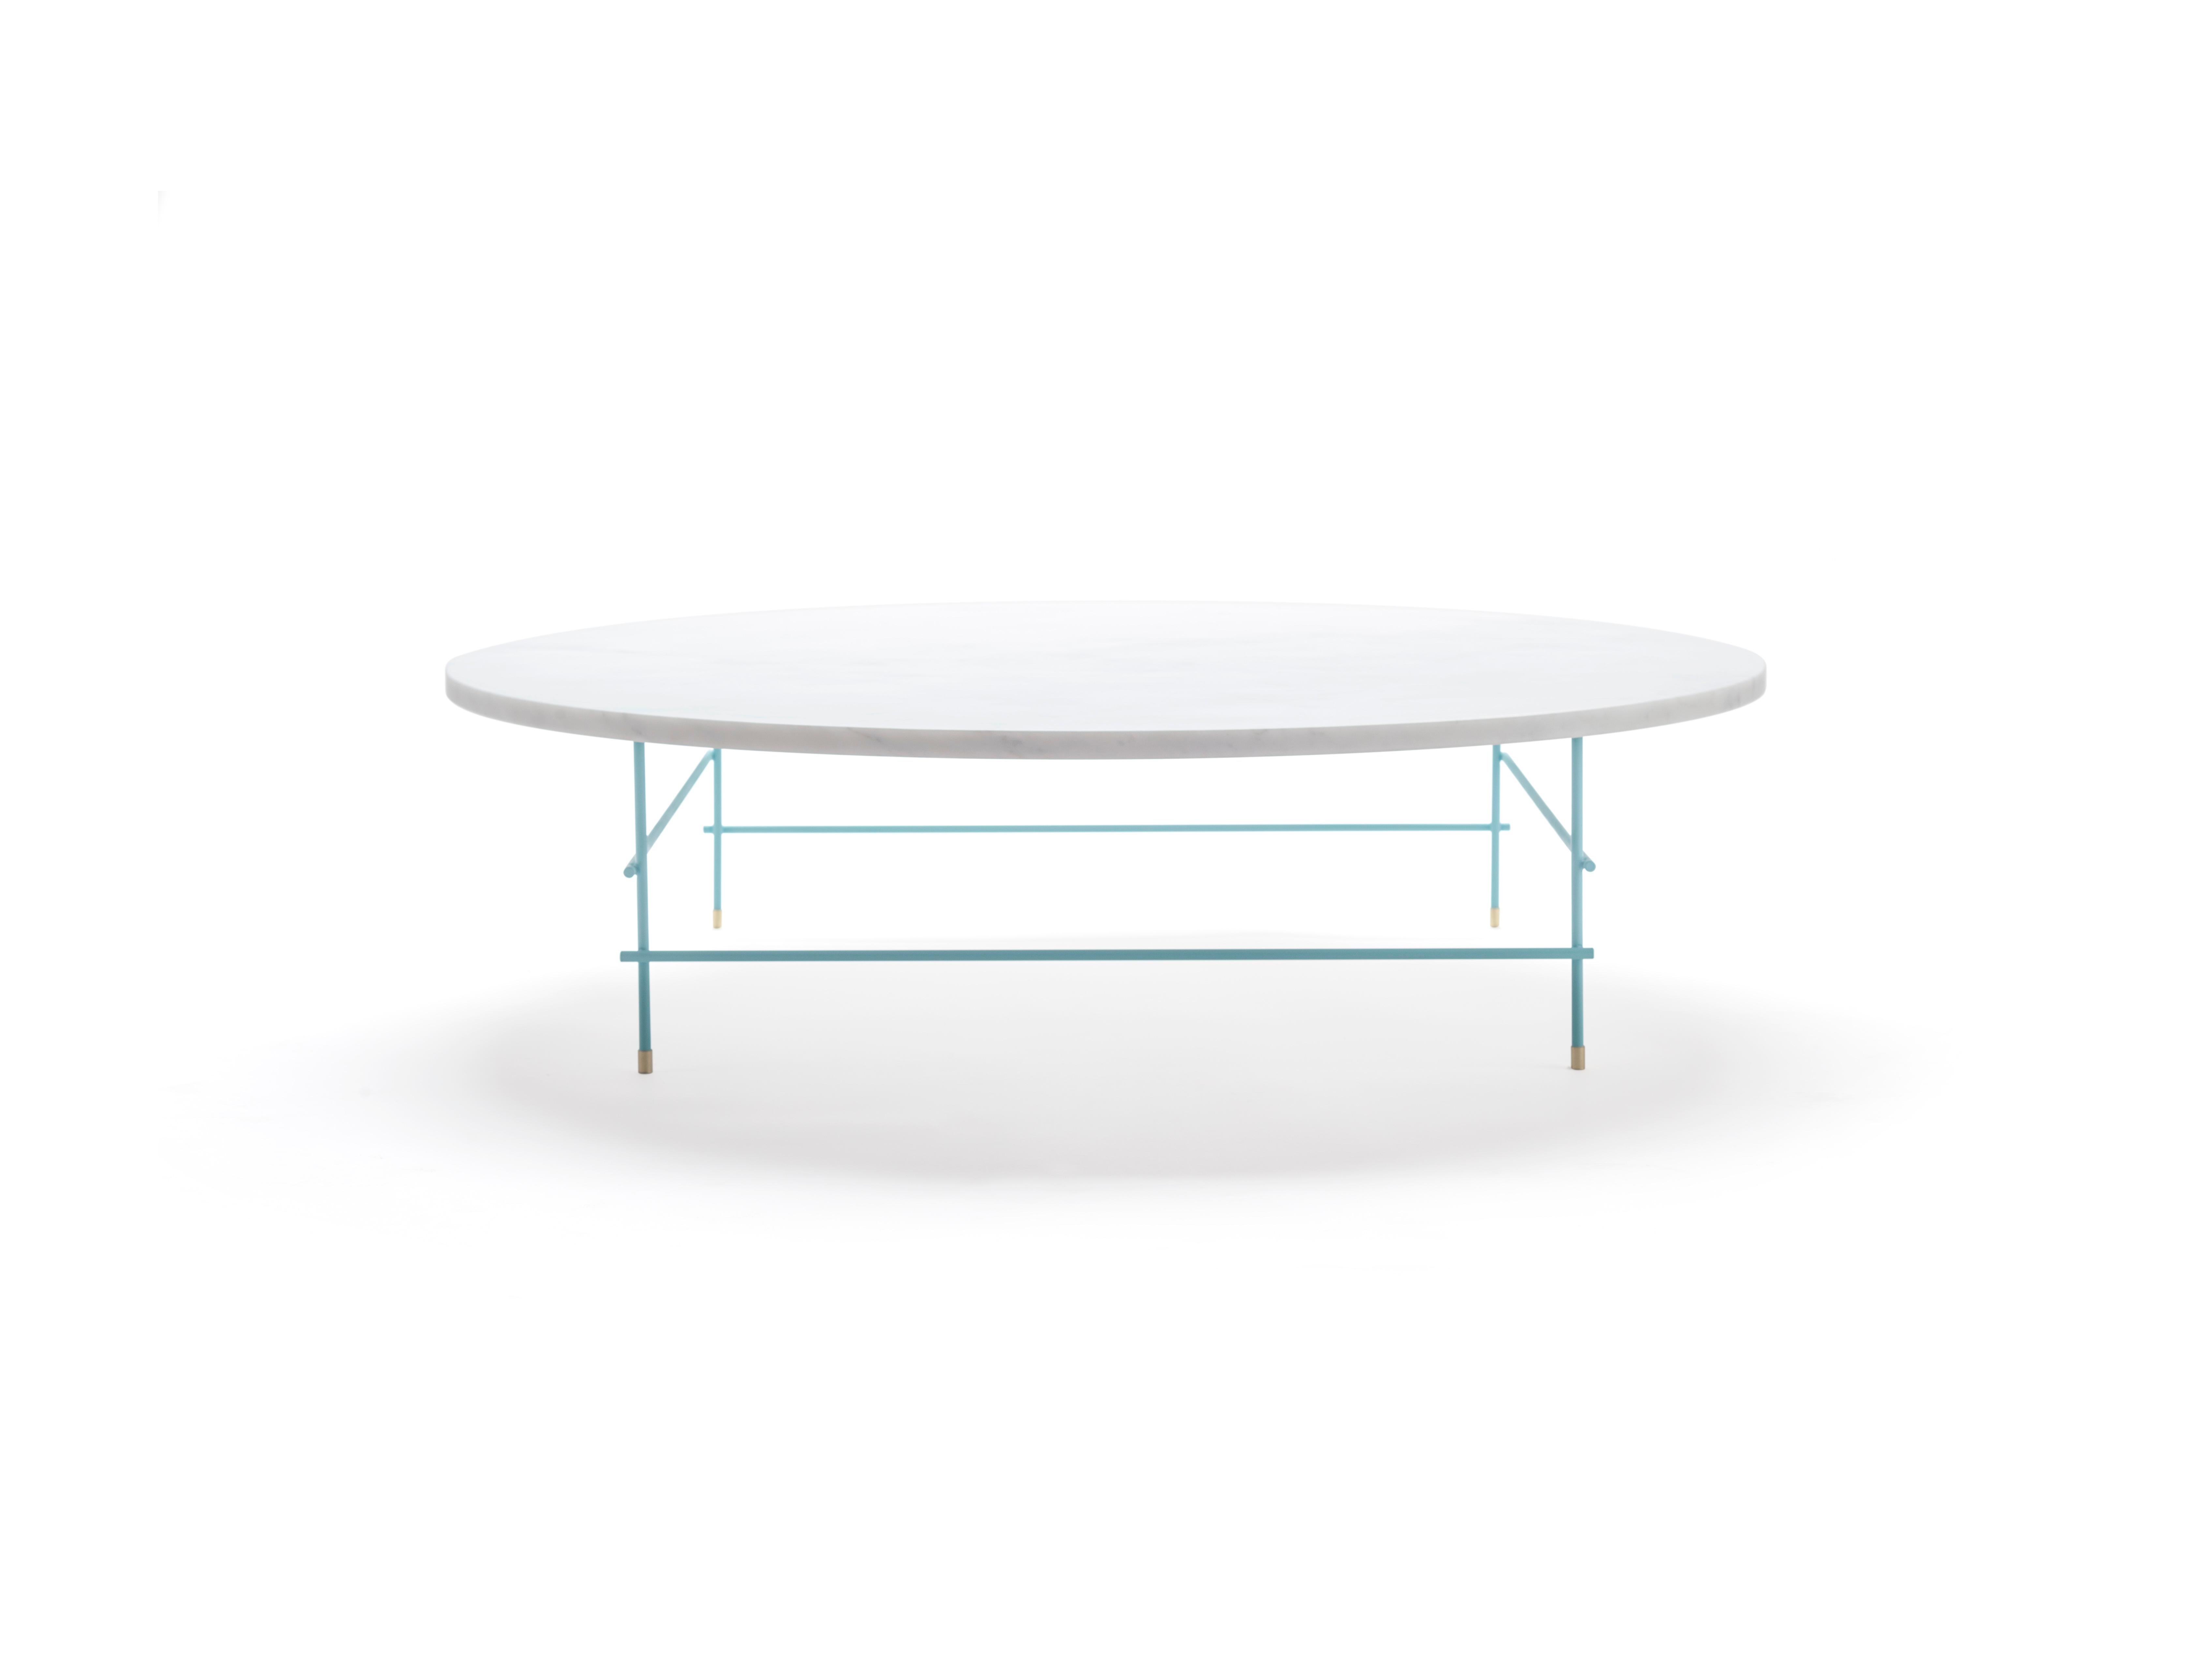 Marble coffee table by Joseph Vila Capdevila
Material: Carrara marble, blue lacquered iron
Dimensions: ø 100 x 25.5 cm
Weight: 46.5 kg


Aparentment is a space for creation and innovation, experimenting with materials with the goal to develop